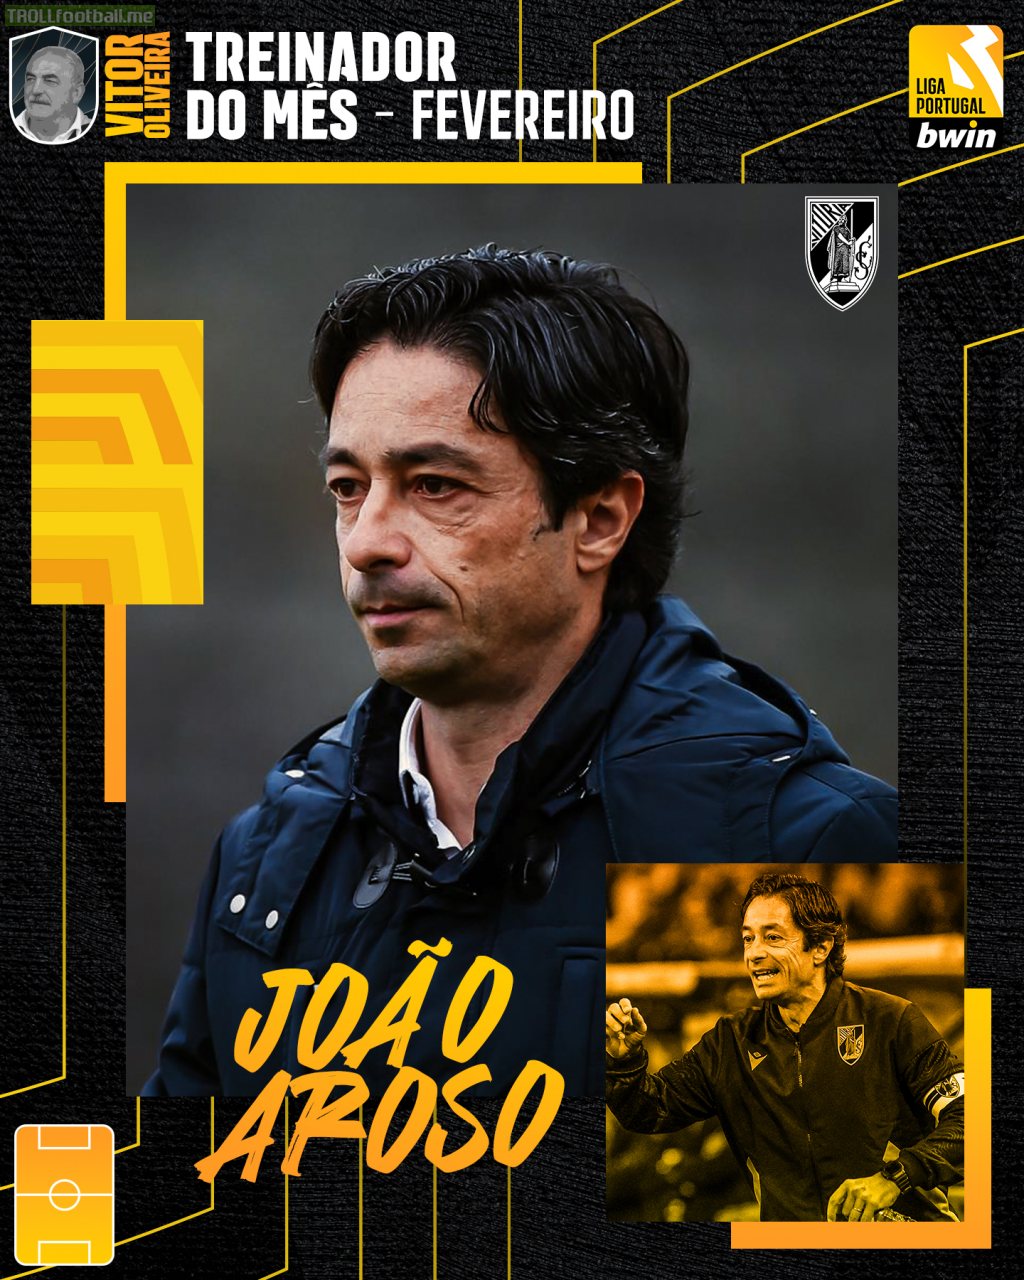 João Aroso, assistant coach of Vitória SC, wins Manager of the Month in the Primeira Liga because Moreno, the head coach, doesn't have the enough qualifications to be recognized as the head coach